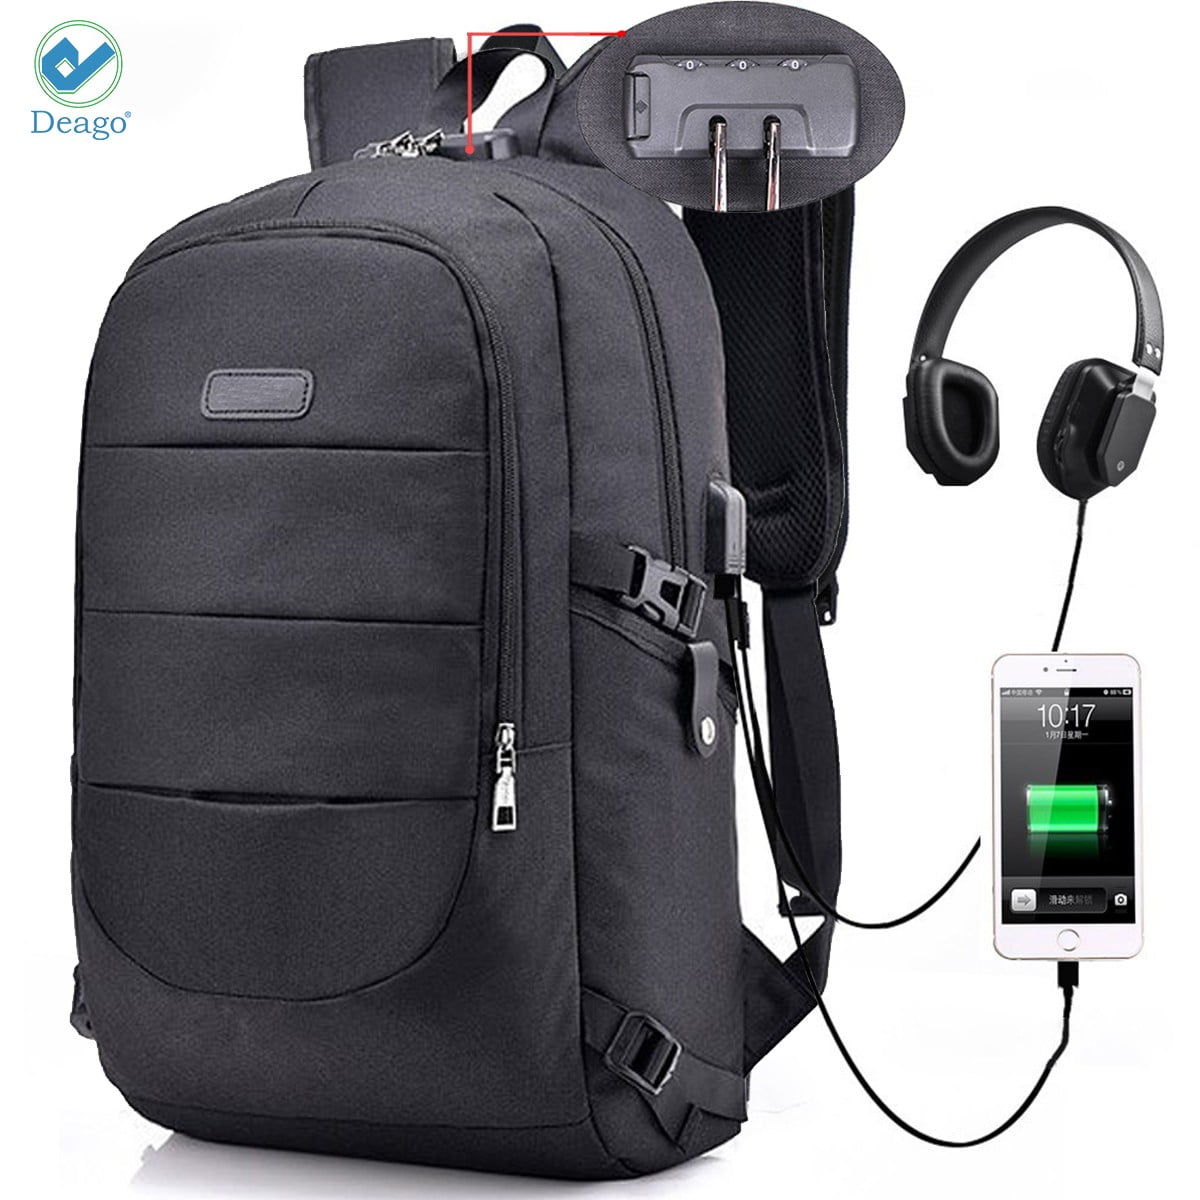 Anti Theft Water Resistant College School Bookbag Travel Backpack Laptop with USB Charging Port for Men Womens Boys Girls Color : Black 